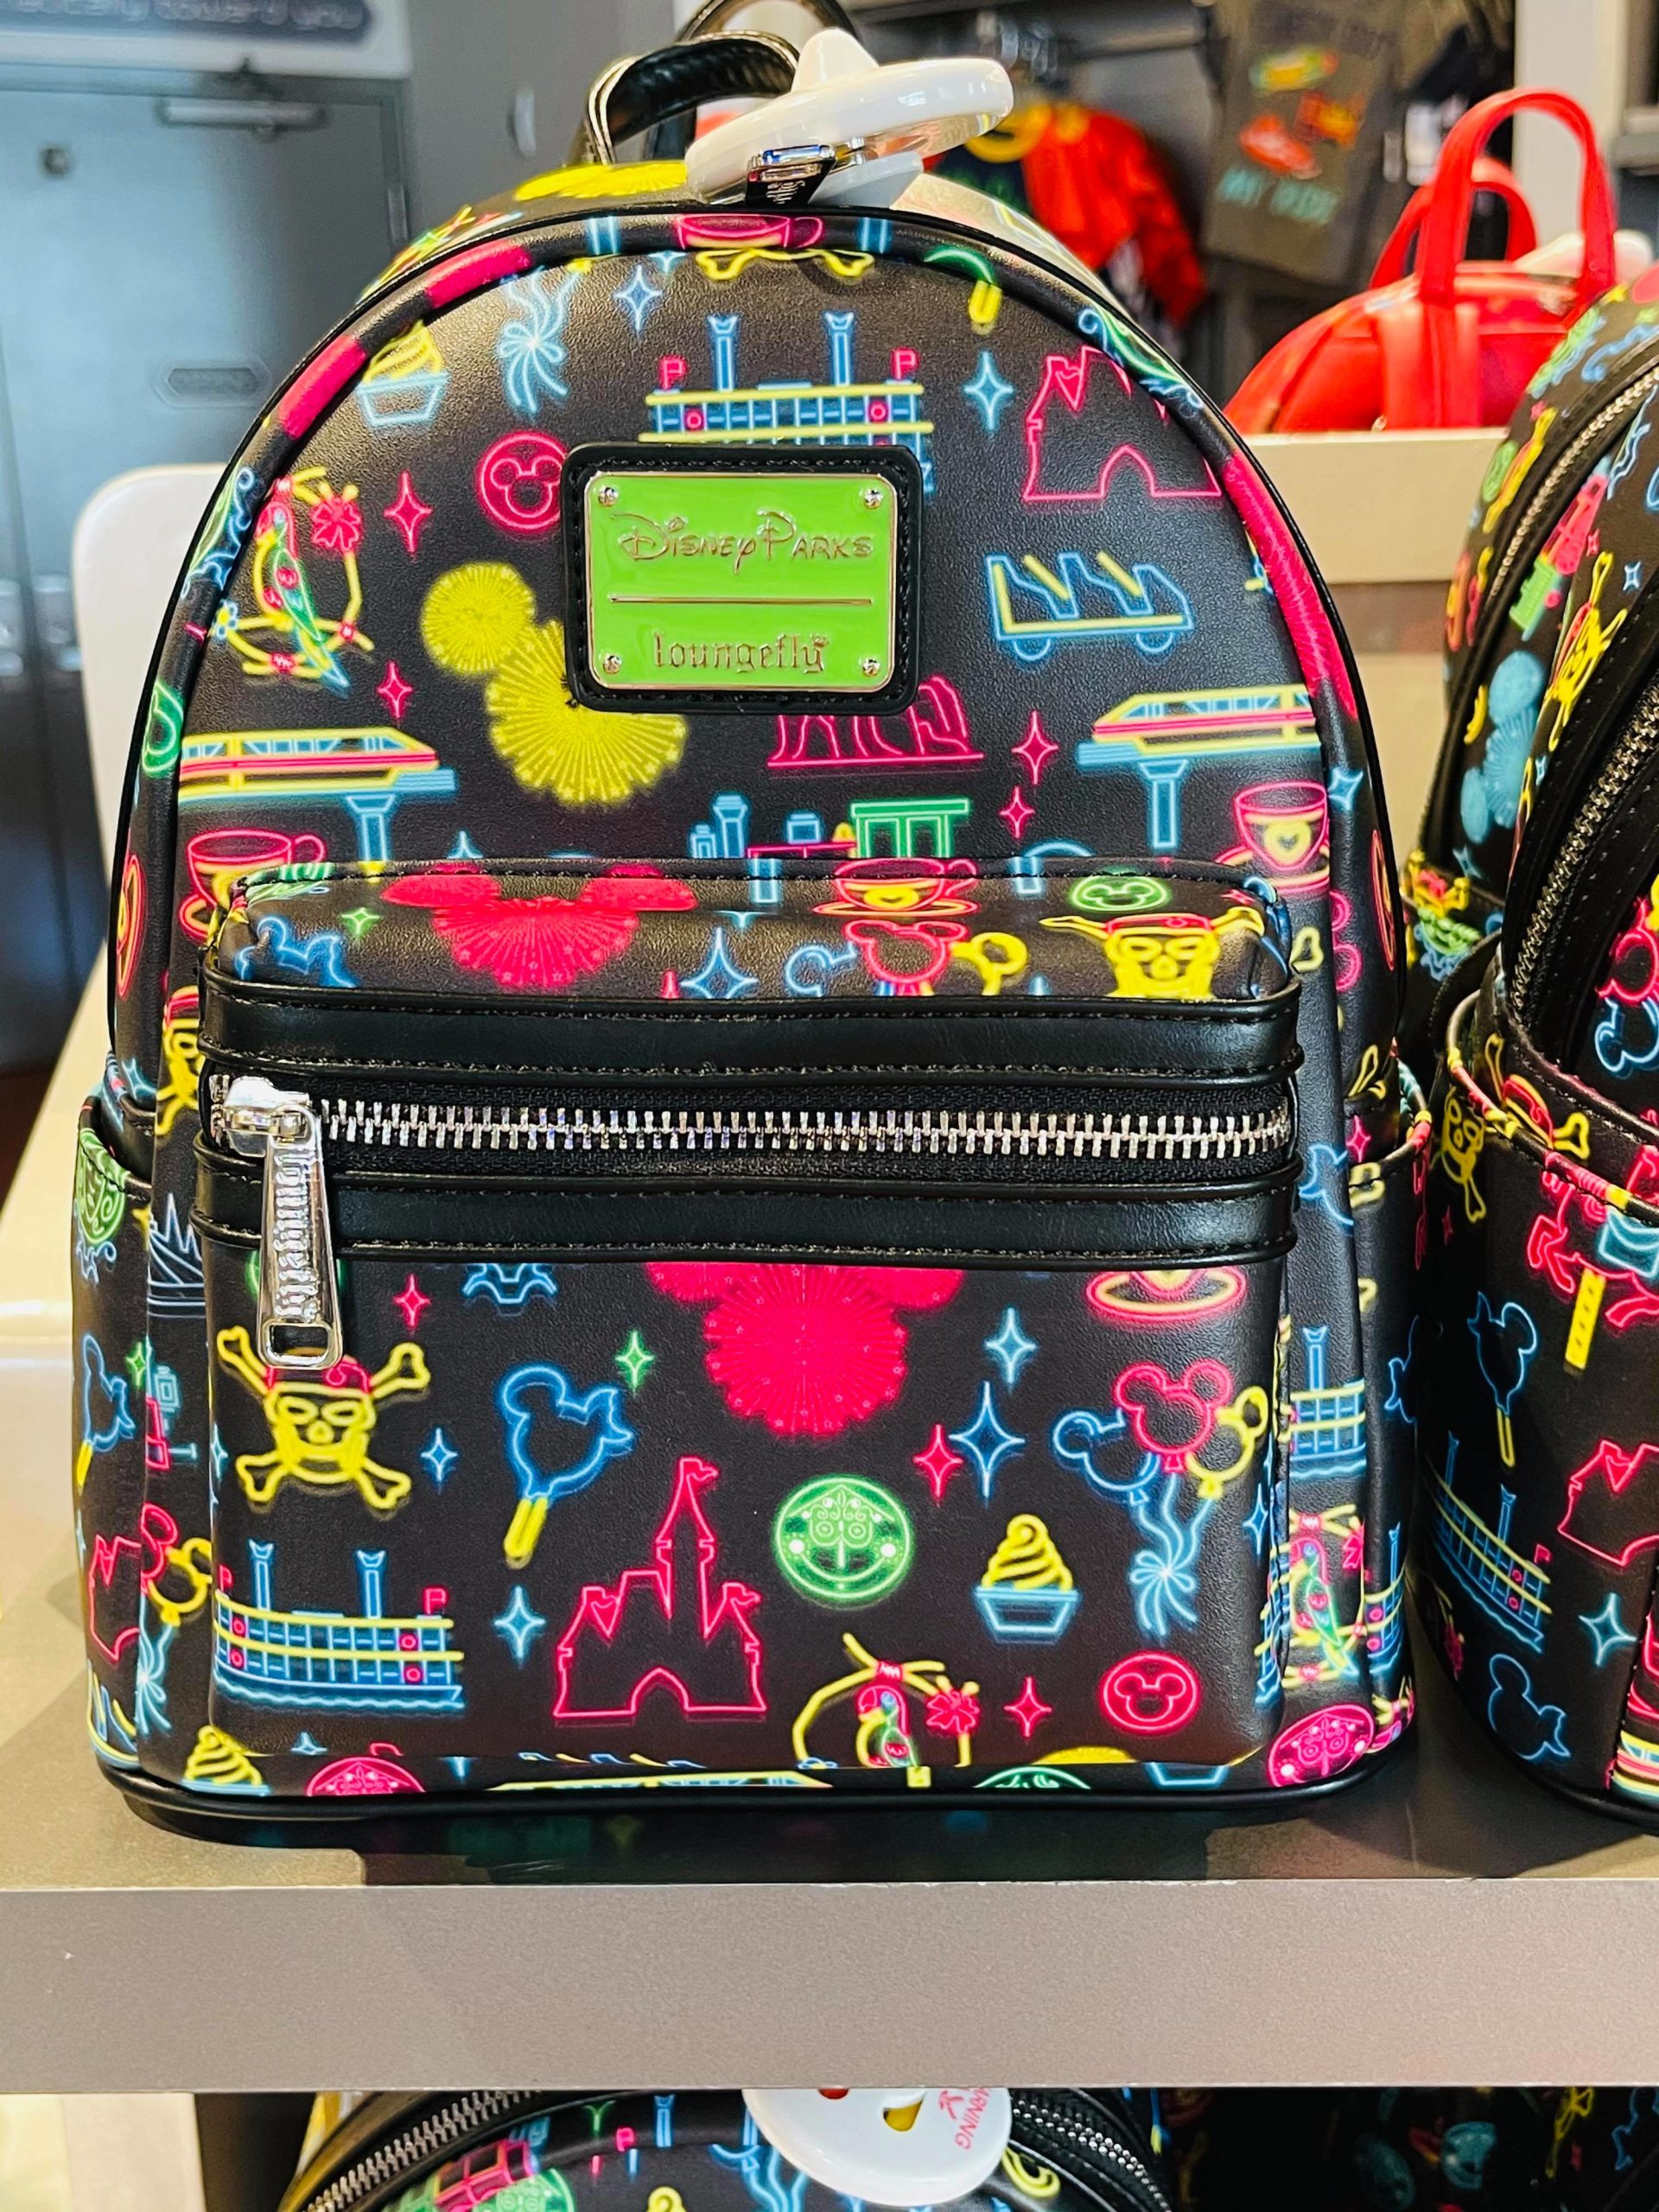 This Stylish Loungefly Mini Backpack Is a Neon Dream - MickeyBlog.com